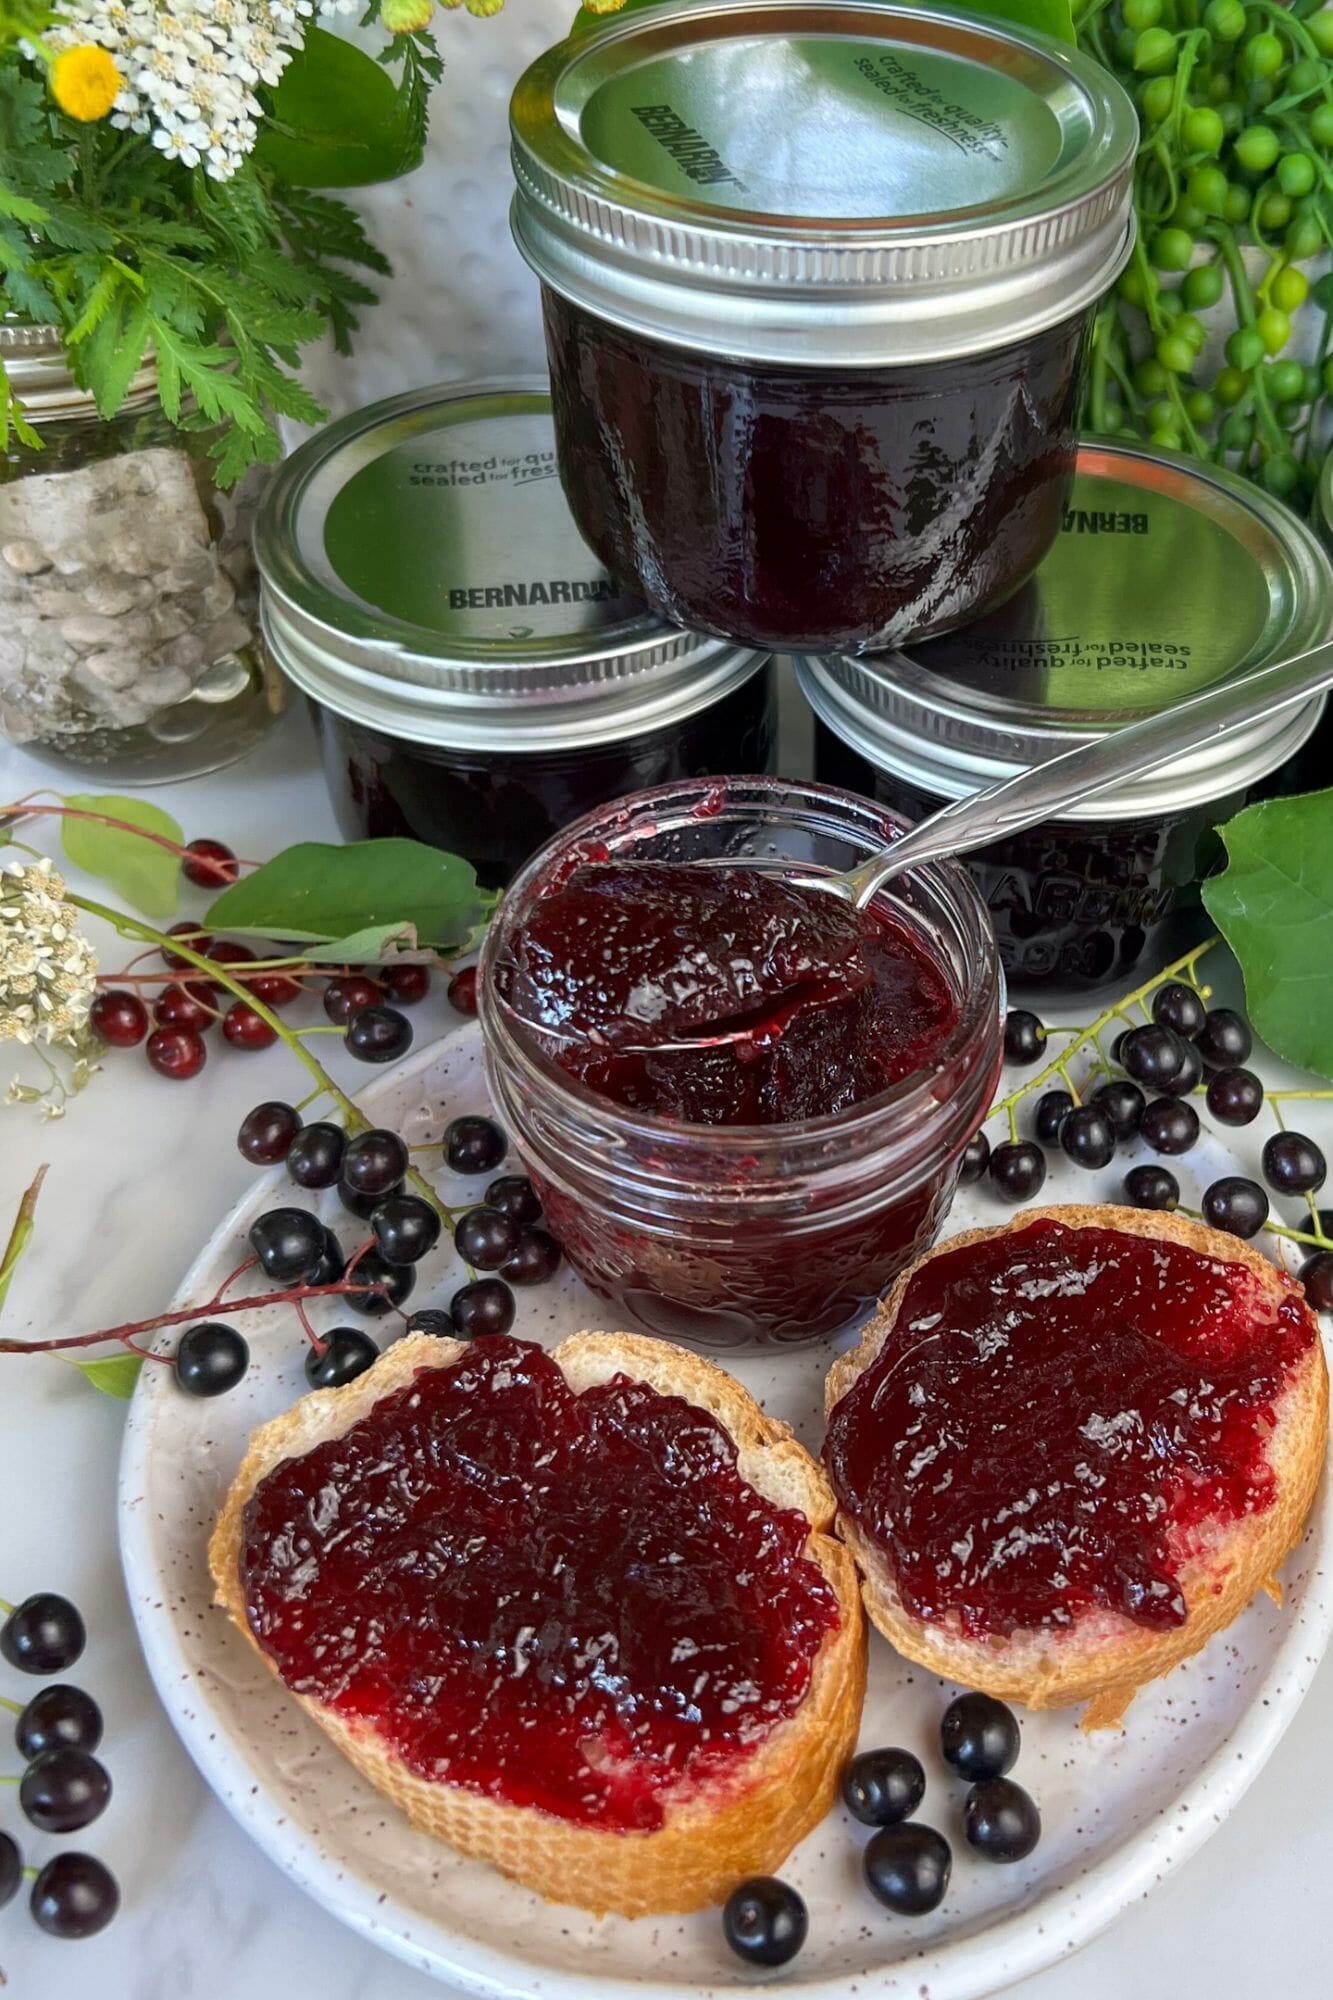 stack of Chokecherry Jelly jars and some spread on toast in the foreground